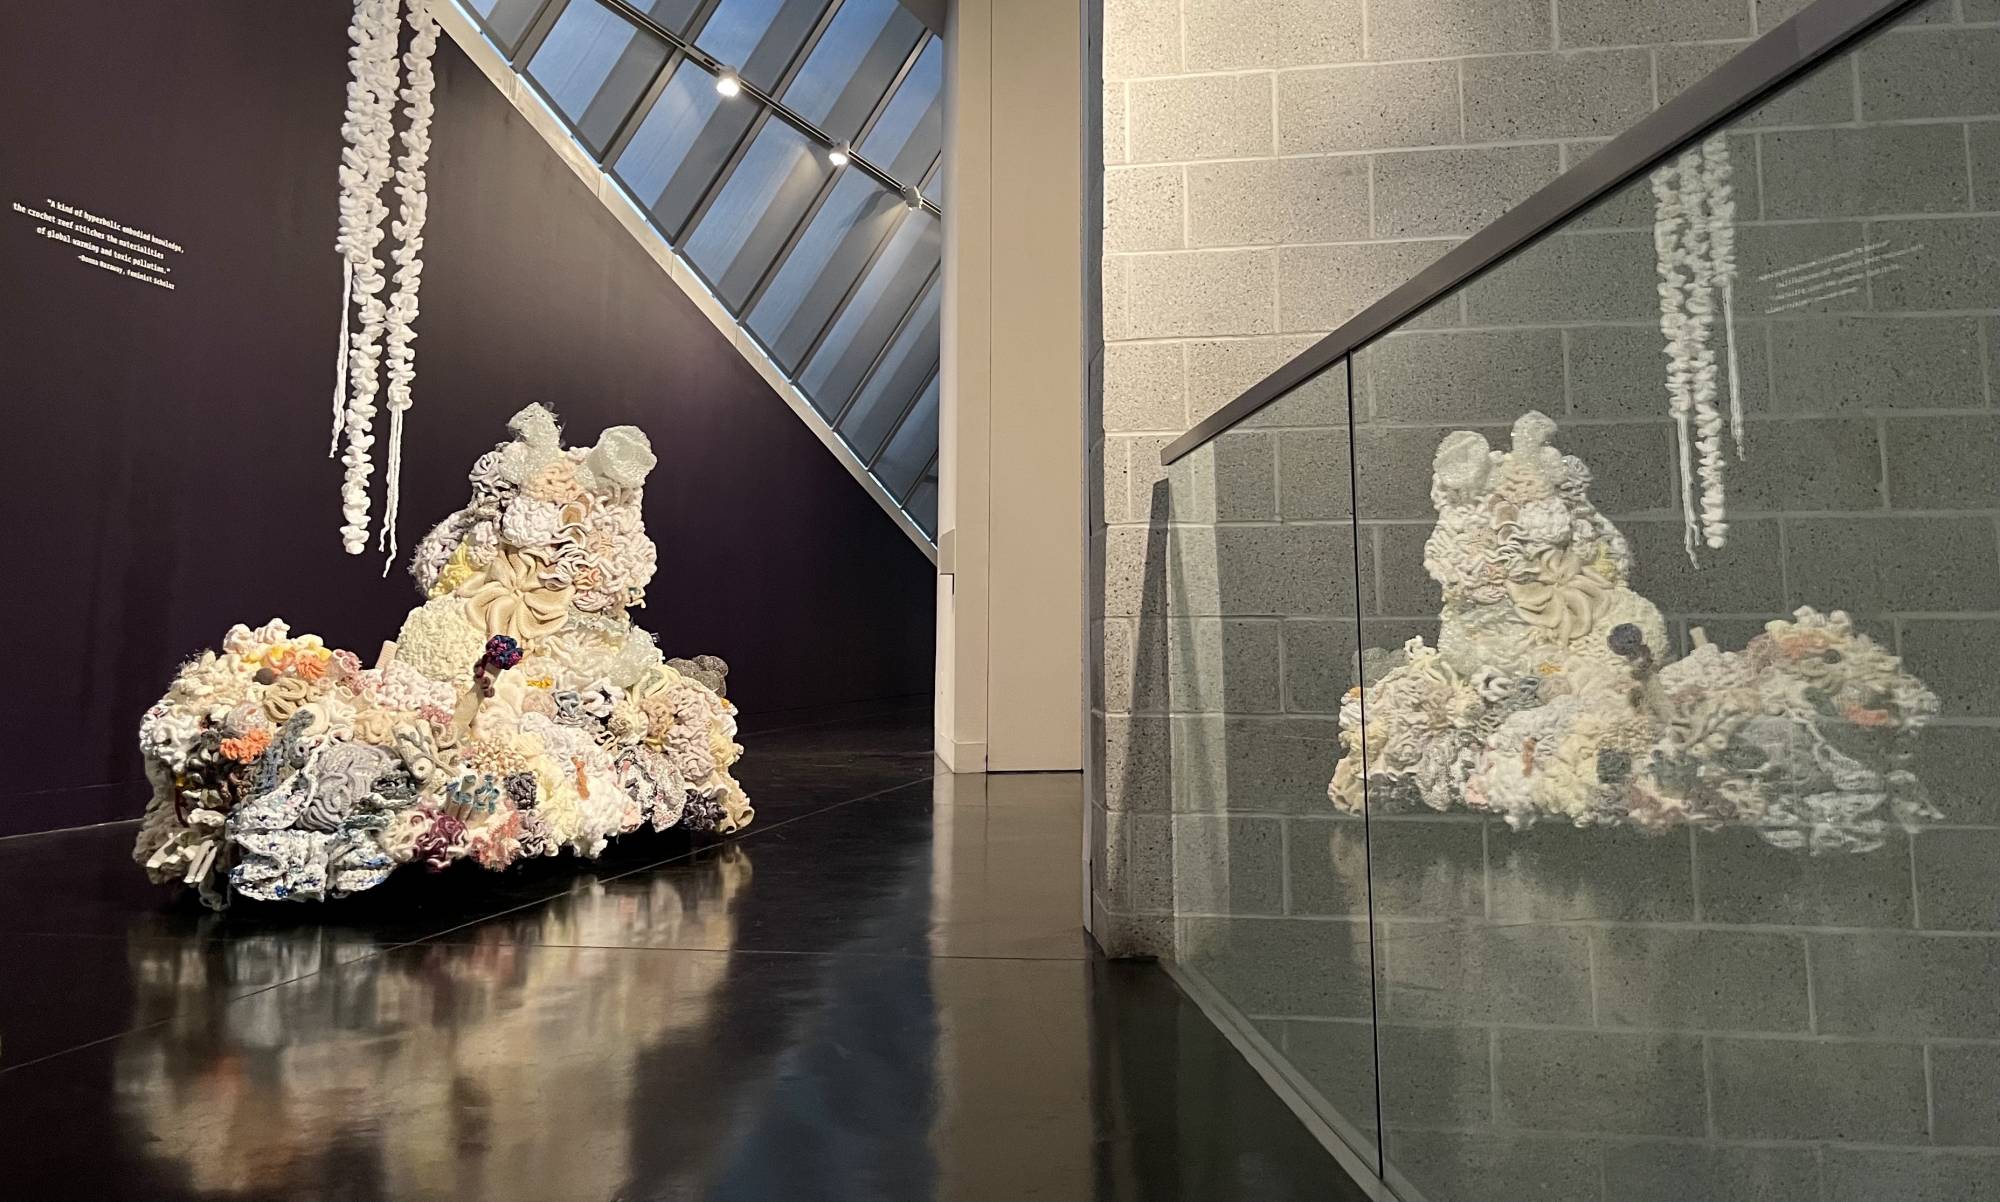 Island of white crochet corals win museum with reflections in glass